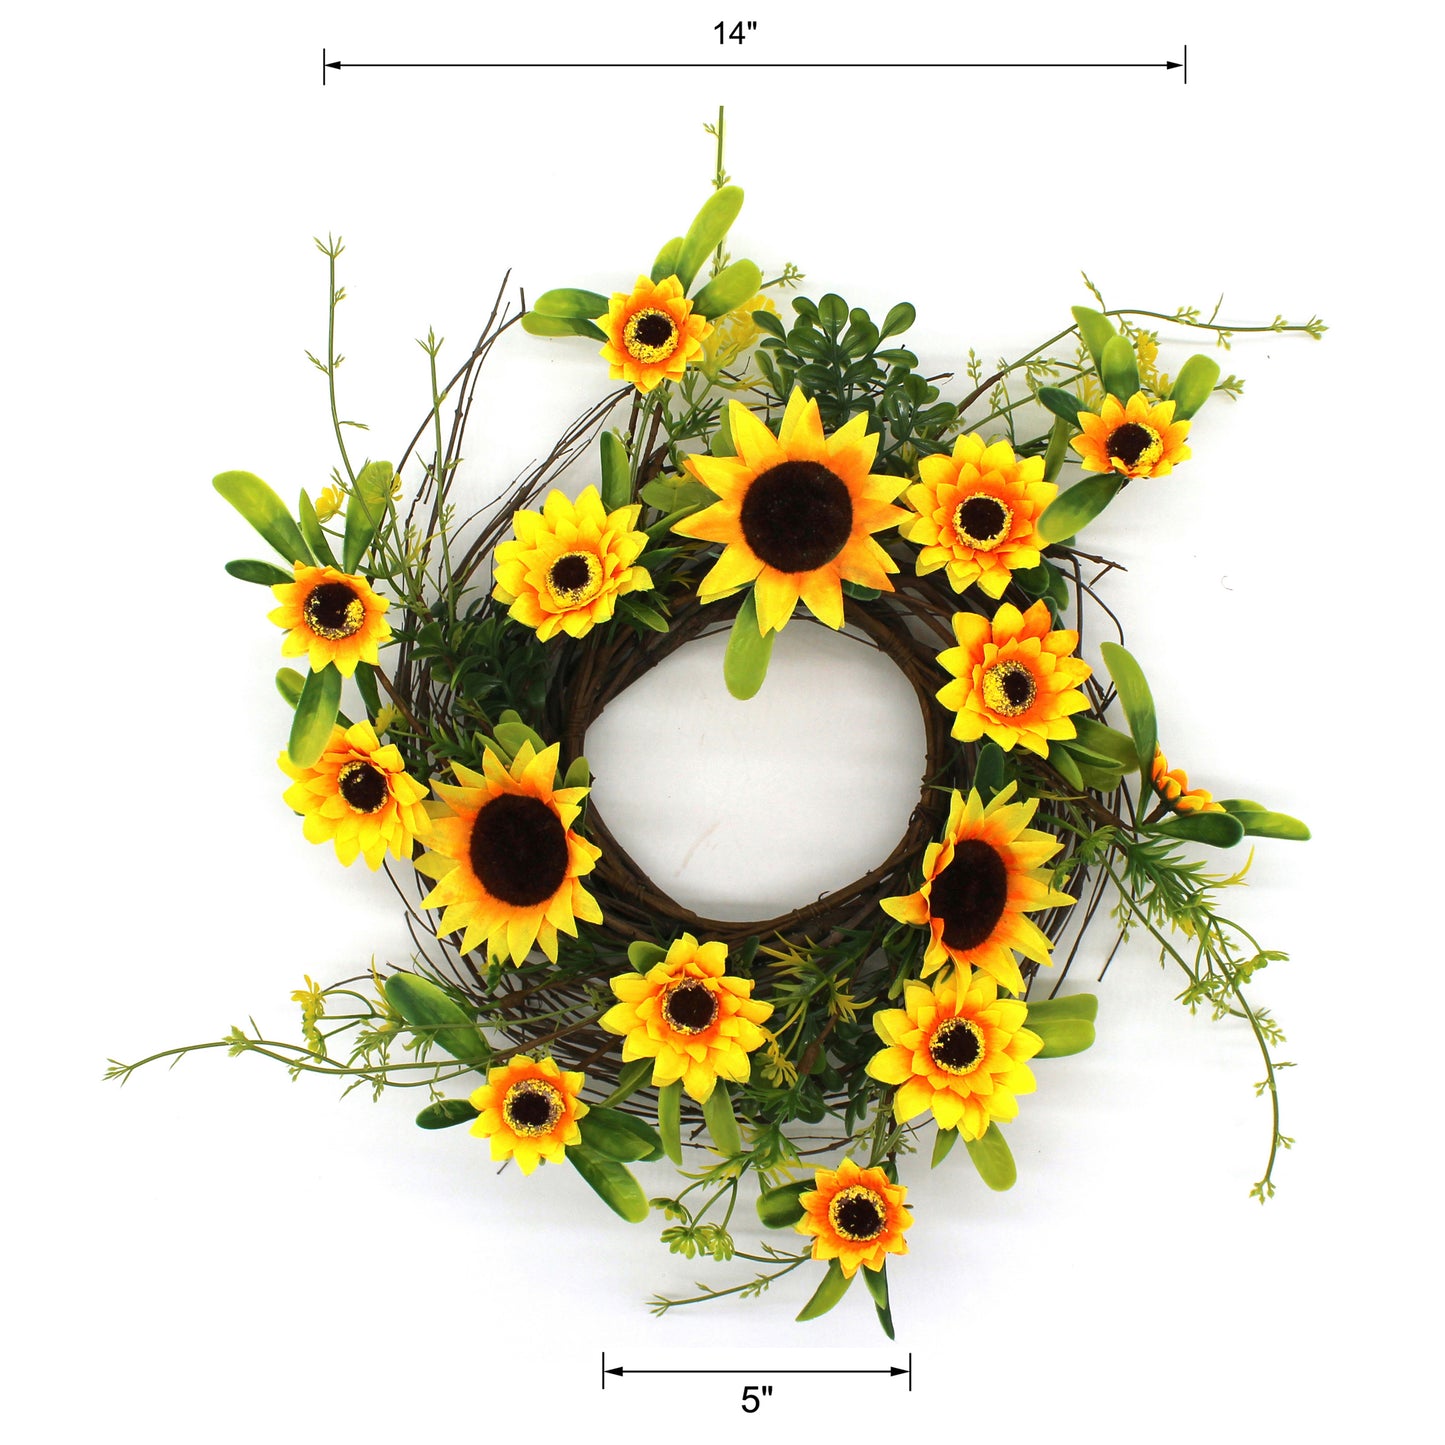 CVHOMEDECO. Rustic Country Artificial Sunflower and Twig Wreath, Year Round Full Green Wreath for Indoor or Outdoor Display, 14 Inch